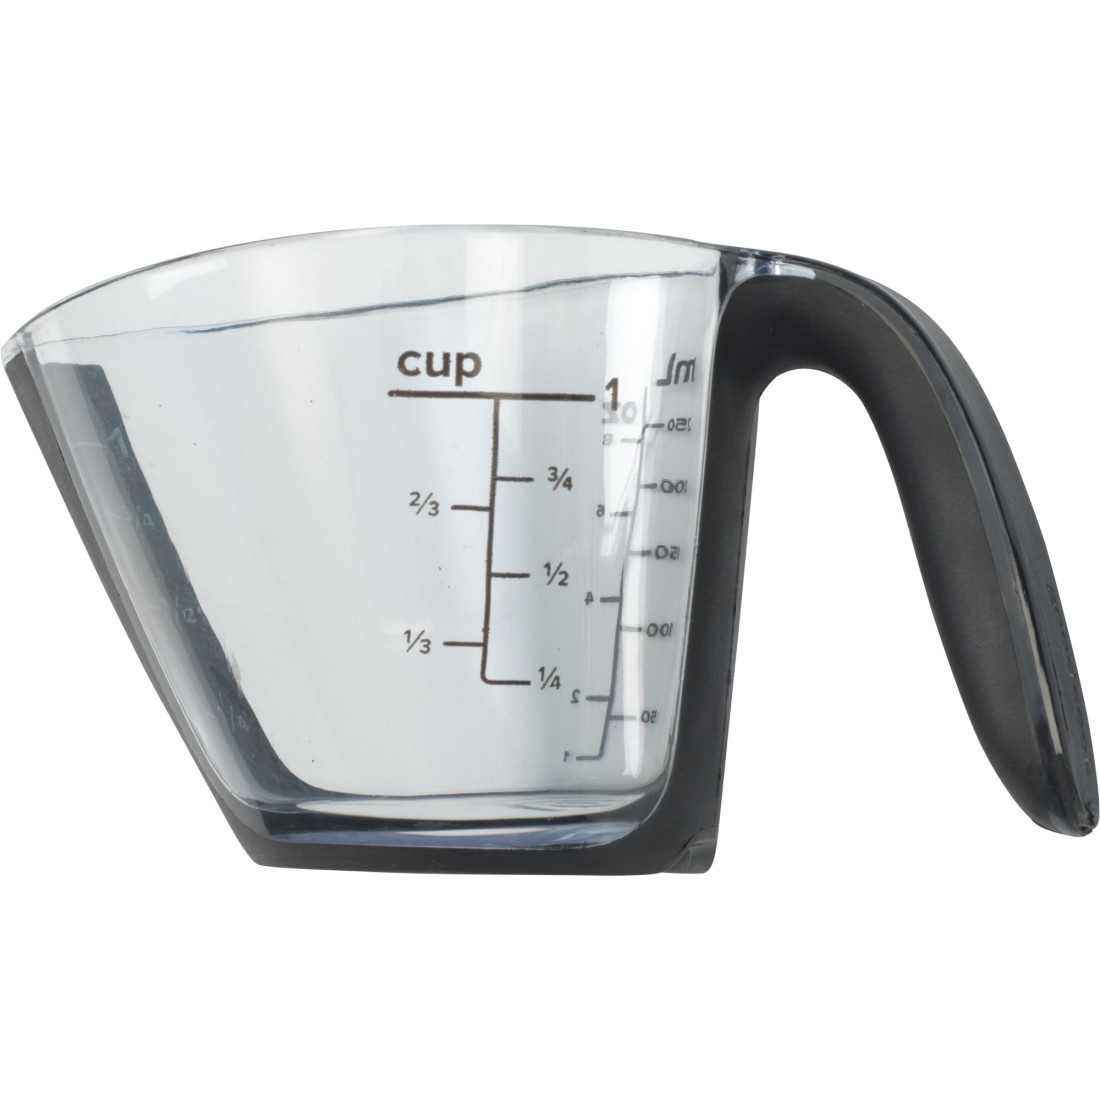 This Angled Measuring Cup Set Is the Only One I'll Ever Use